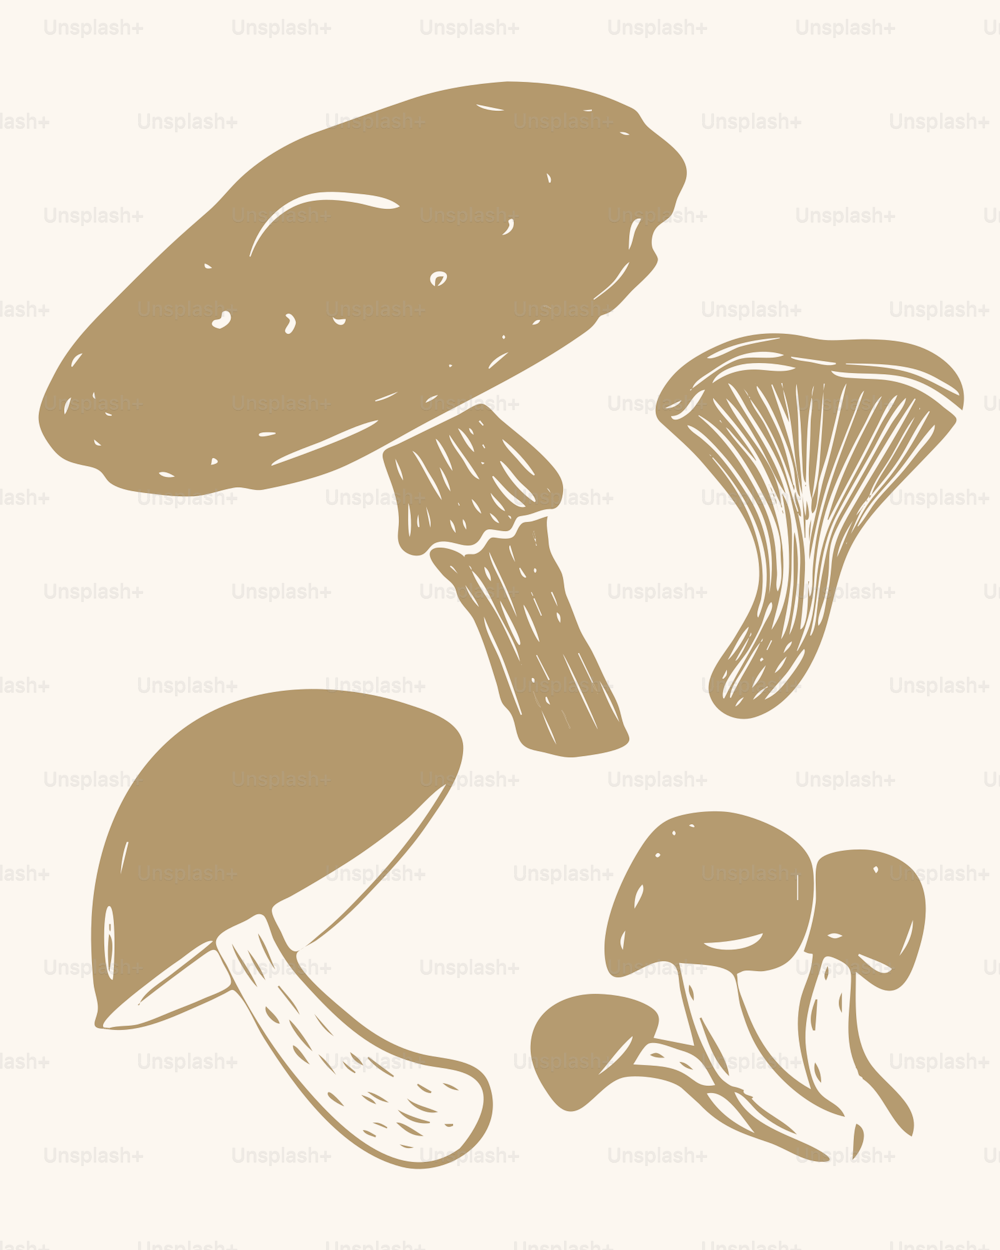 a group of mushrooms on a white background